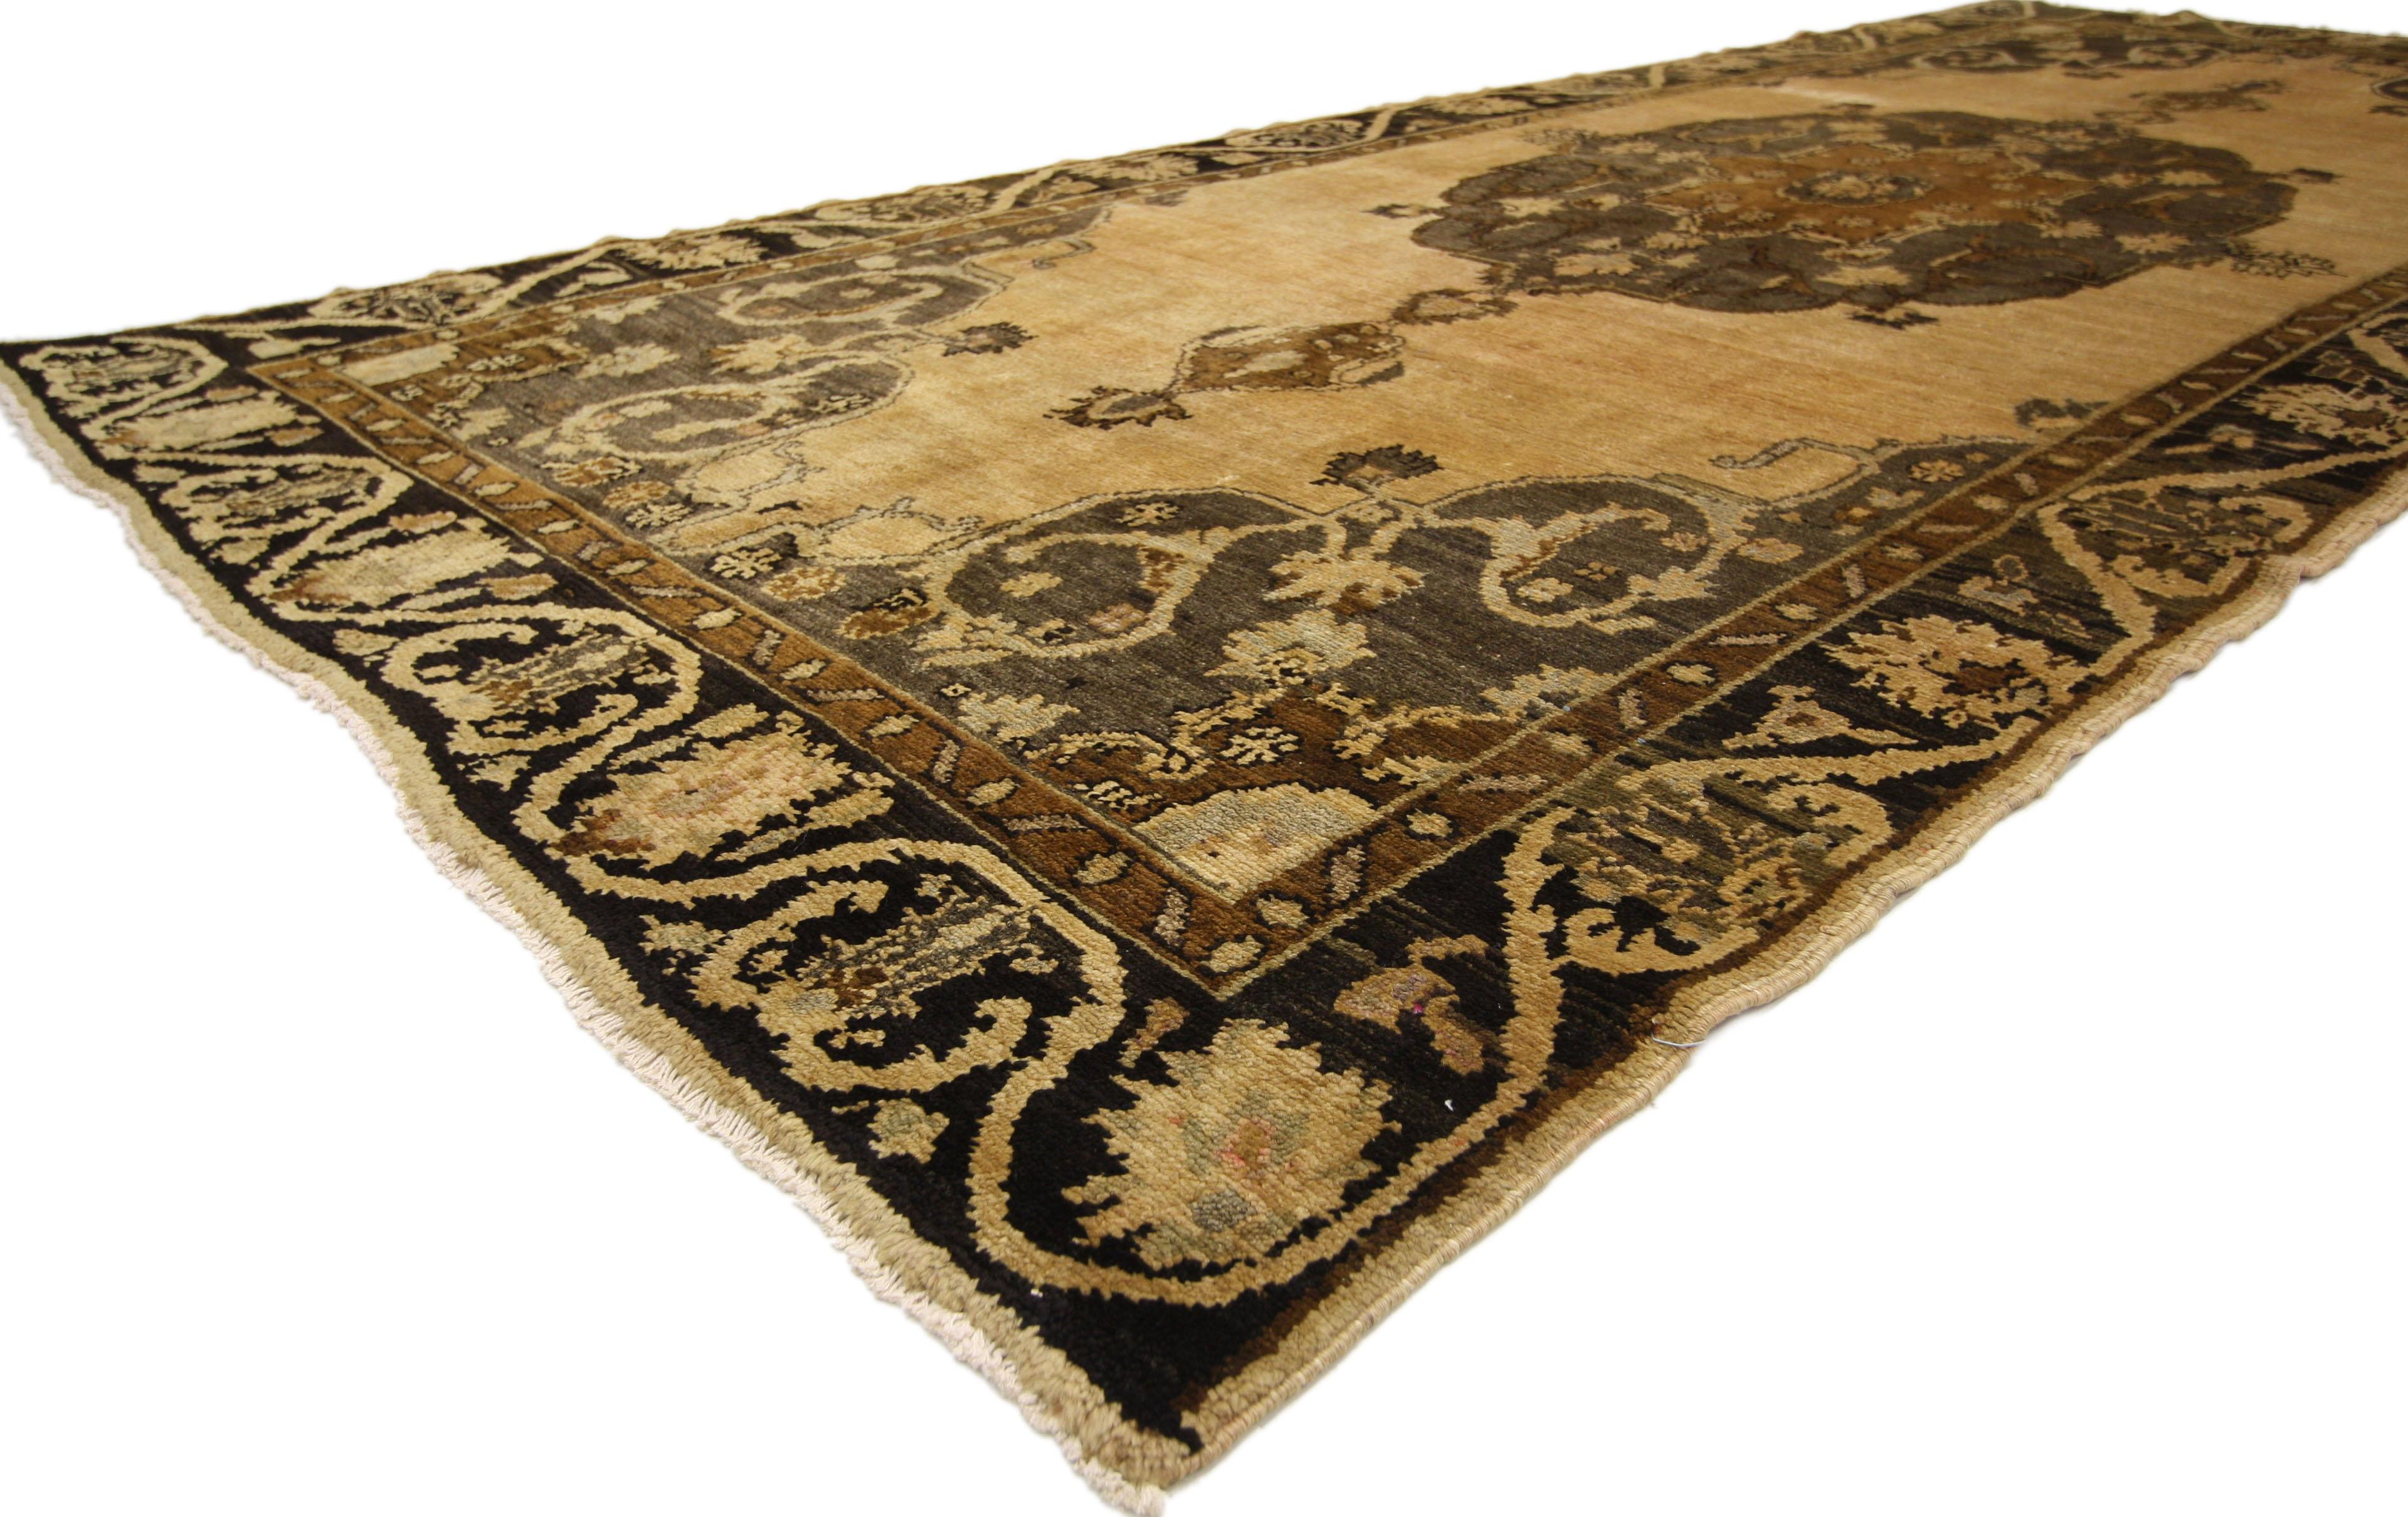 50033 Vintage Turkish Oushak Gallery Rug, Wide Hallway Runner with Modern Style. Full of character and stately presence, this vintage Kars gallery rug showcases an extravagant geometric design. Rendered in beautiful variegated earth tone shades of